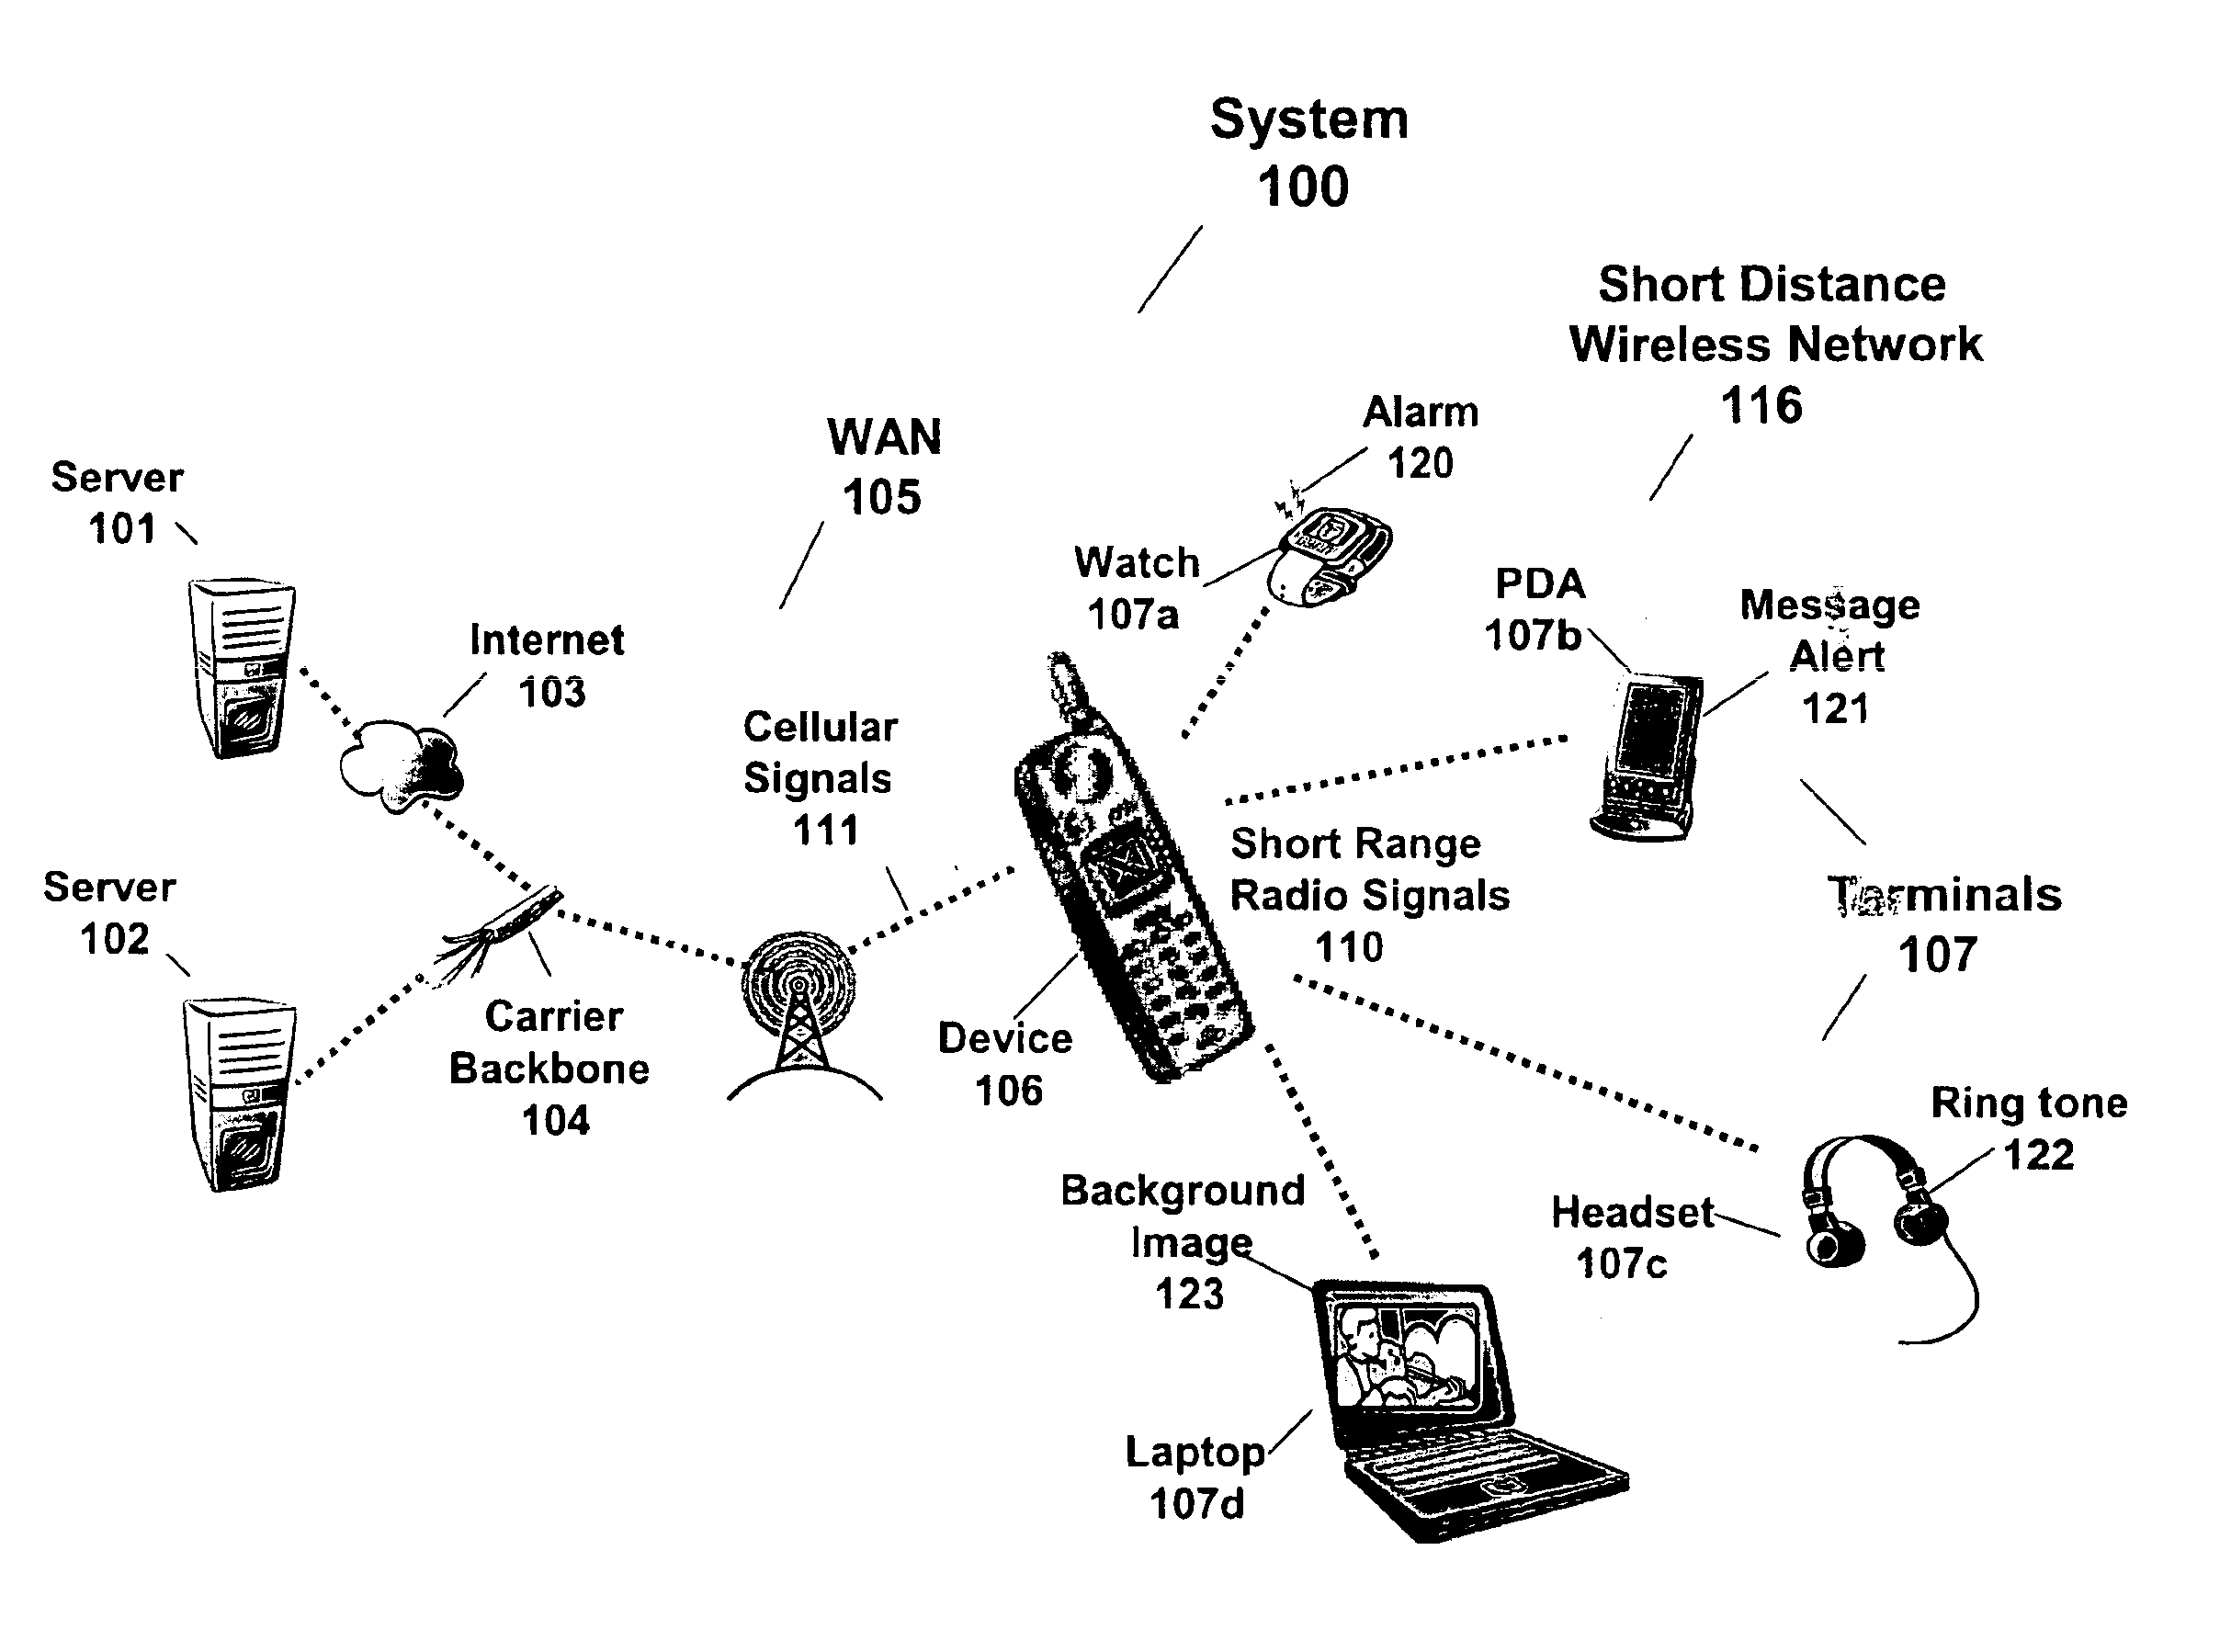 Method, system and computer readable medium for providing an output signal having a theme to a device in a short distance wireless network